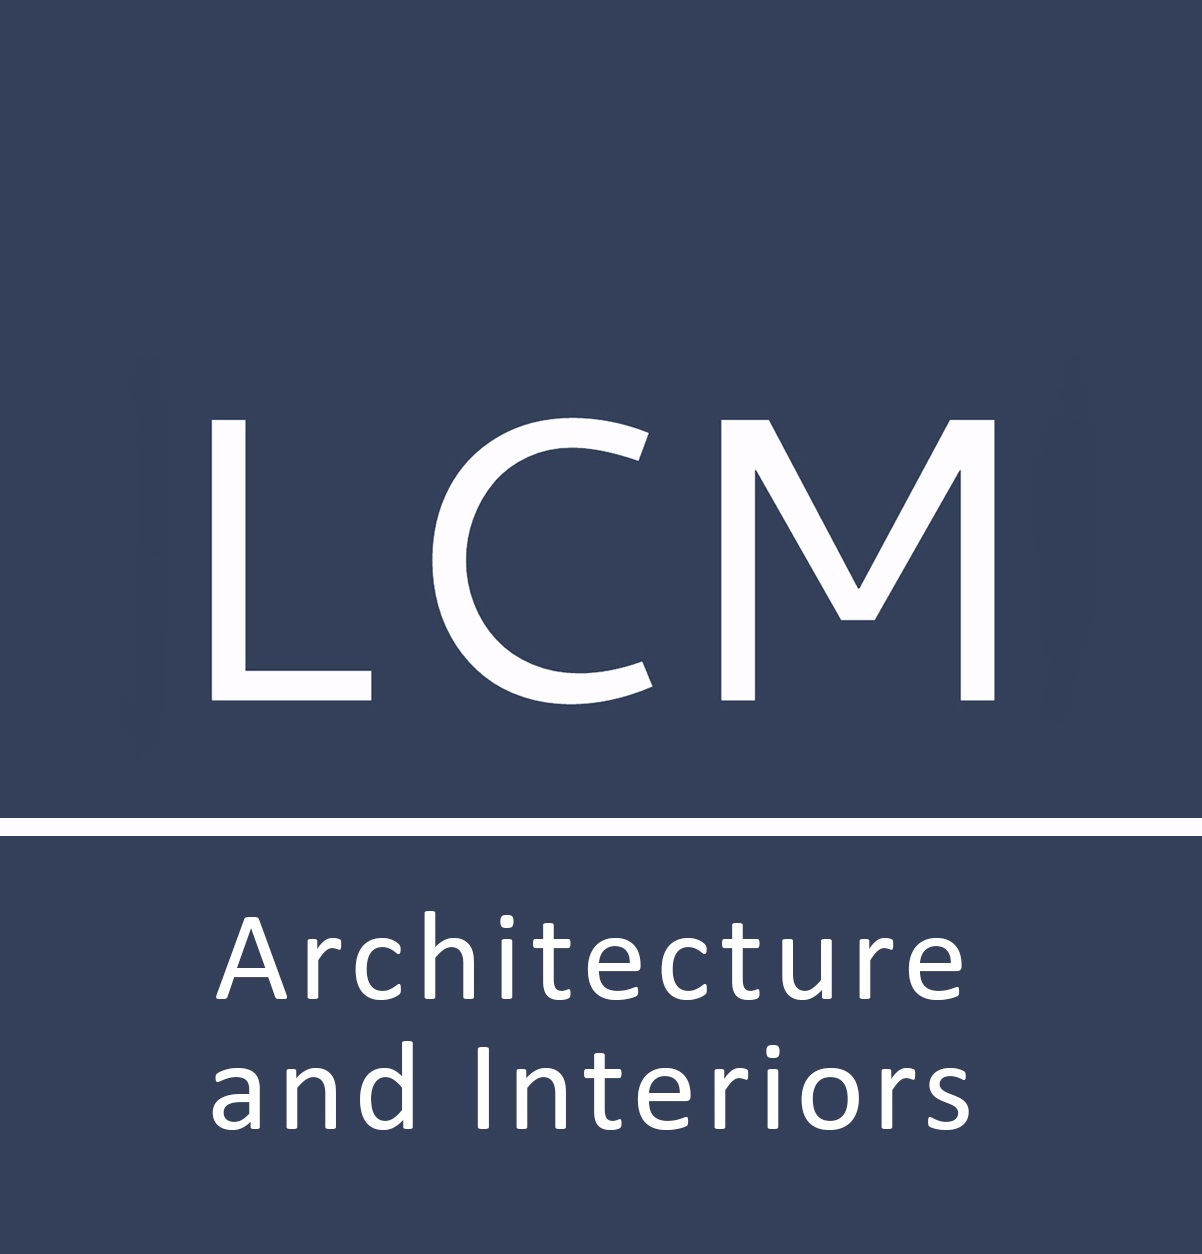 LCM Architecture and Interiors